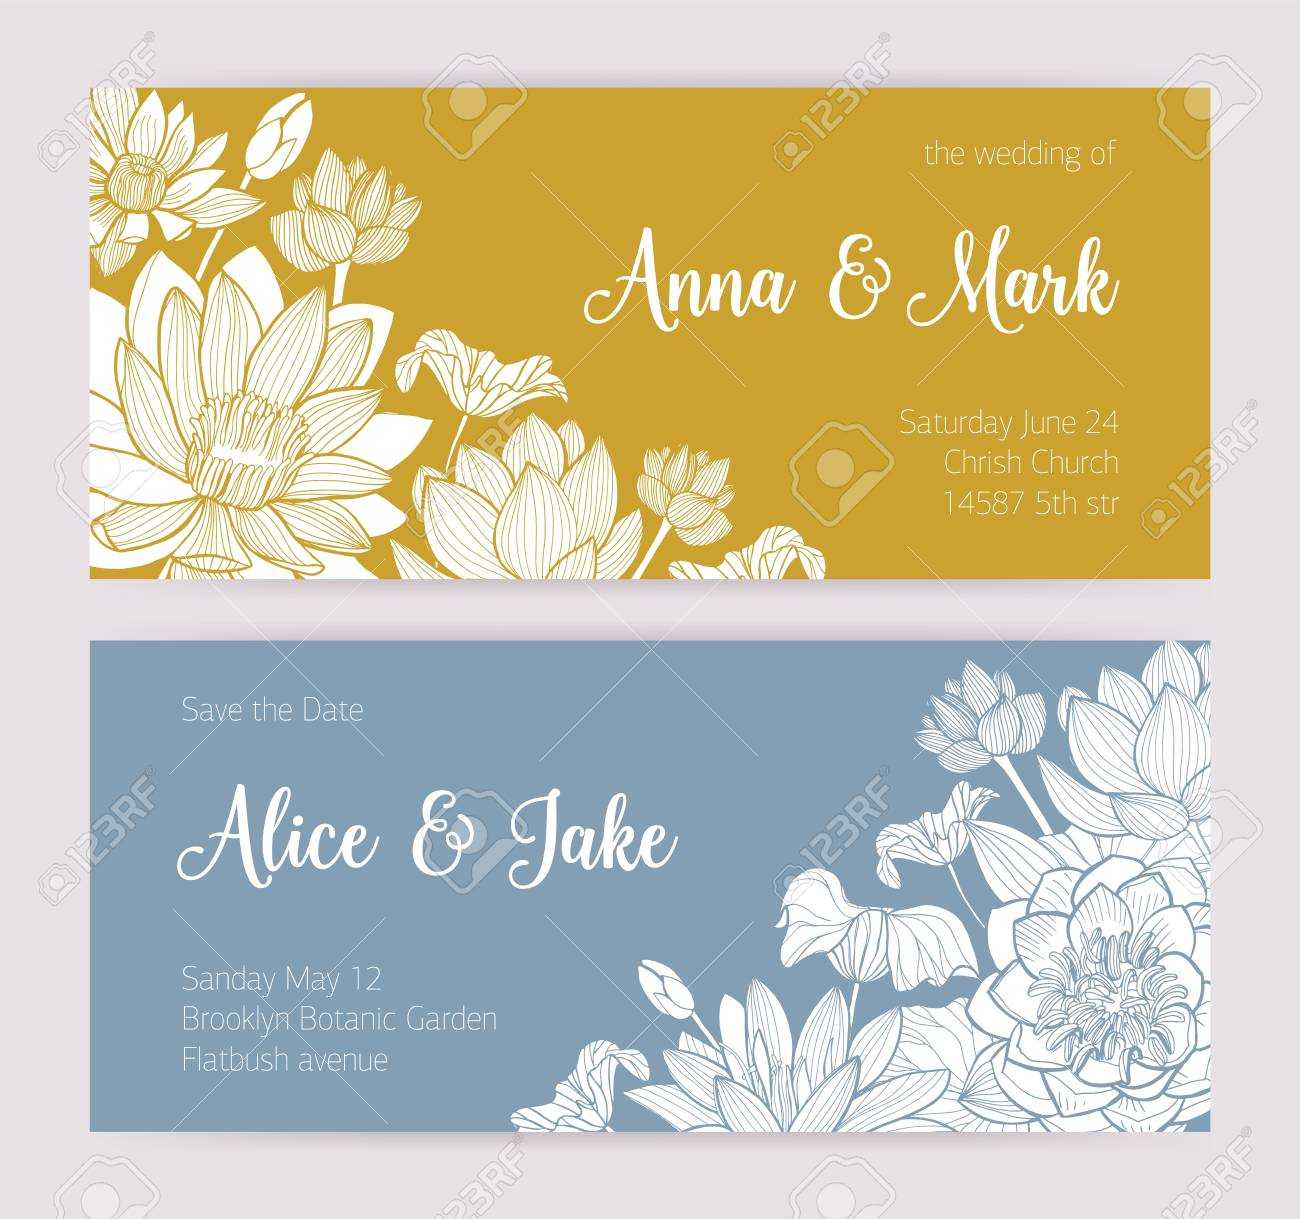 Elegant Wedding Invitation Or Save The Date Card Templates With.. With Regard To Save The Date Cards Templates